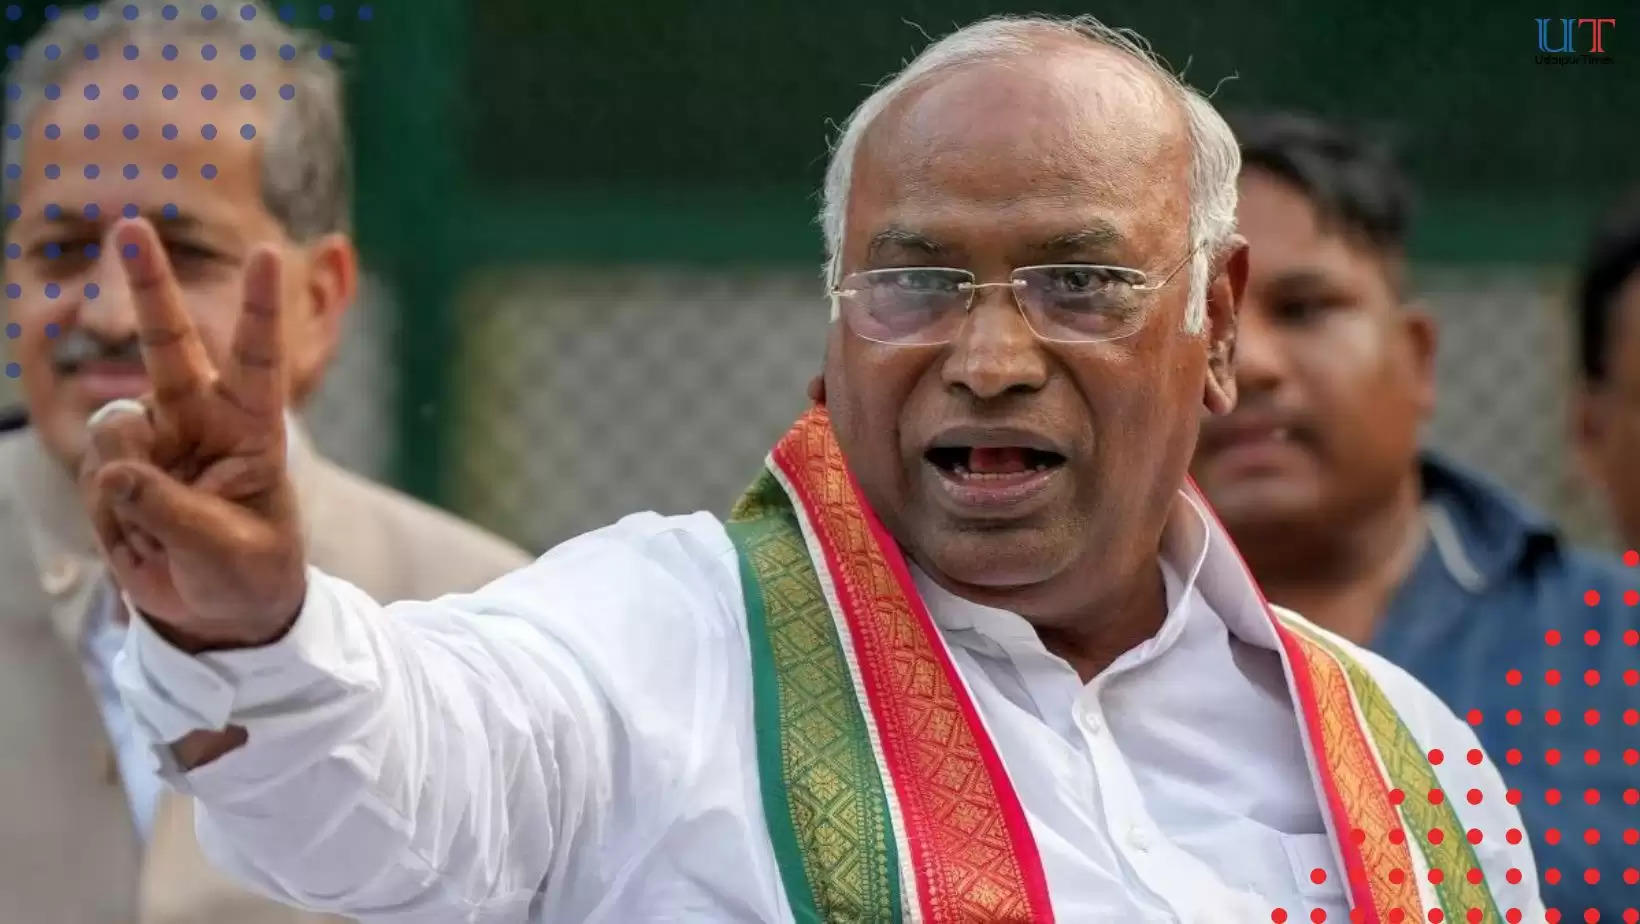  Congress Chief Kharge responds to PM Modi's remarks on Ram Mandir and Article 370 "He is Inciting people through divisive politics"... Kharge